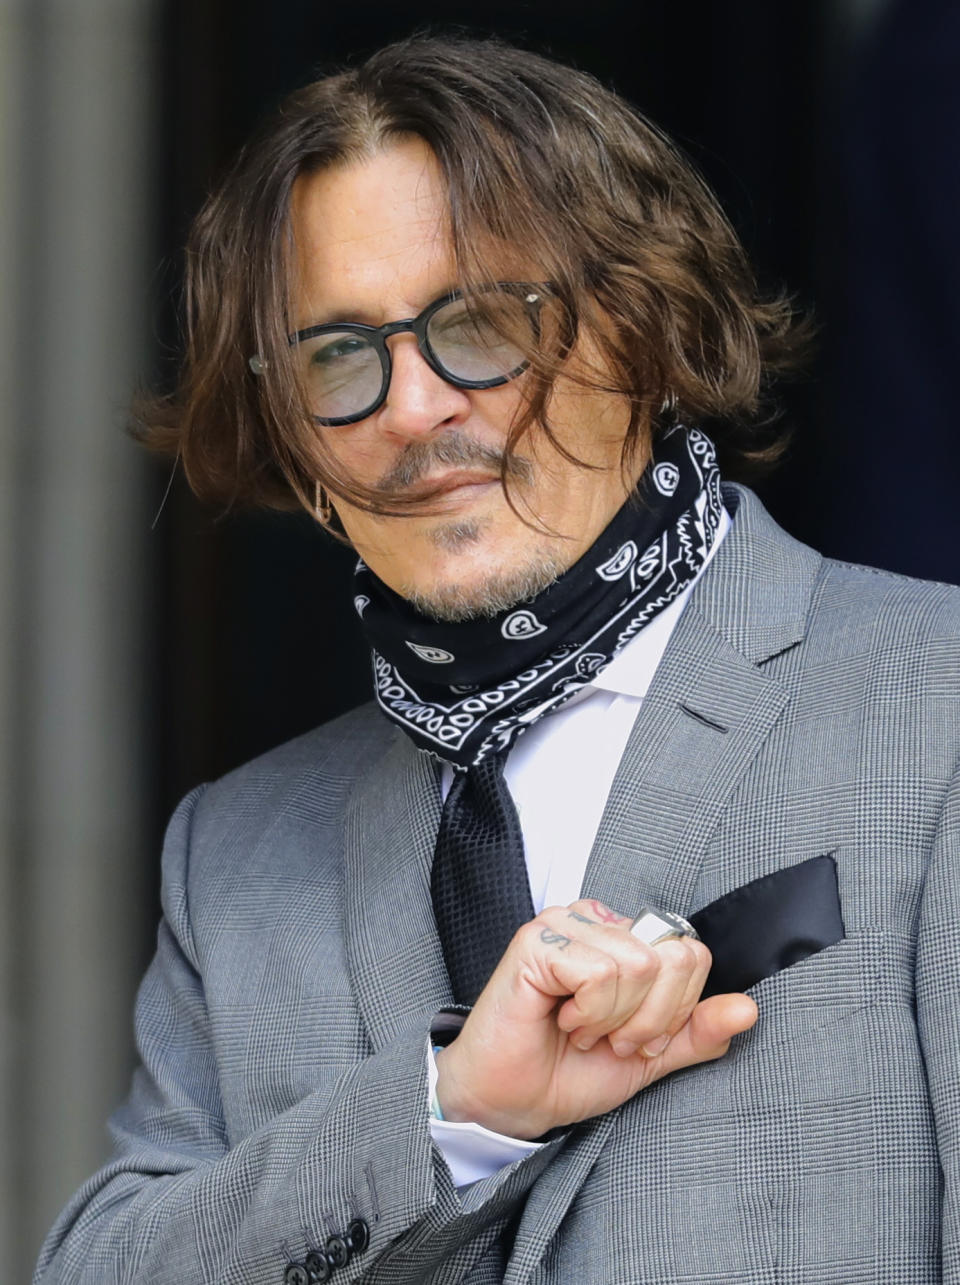 Actor Johnny Depp arrives at the High Court in London to give evidence in his libel case against the publishers of The Sun and its executive editor, Dan Wootton, in London, Monday July 13, 2020. Depp is expected to wrap up his evidence at his libel trial against a tabloid newspaper that accused him of abusing ex-wife Amber Heard. The Hollywood star is suing News Group Newspapers, publisher of The Sun, and the paper’s executive editor, Dan Wootton, over an April 2018 article that called him a “wife-beater.” (Aaron Chown/PA via AP)